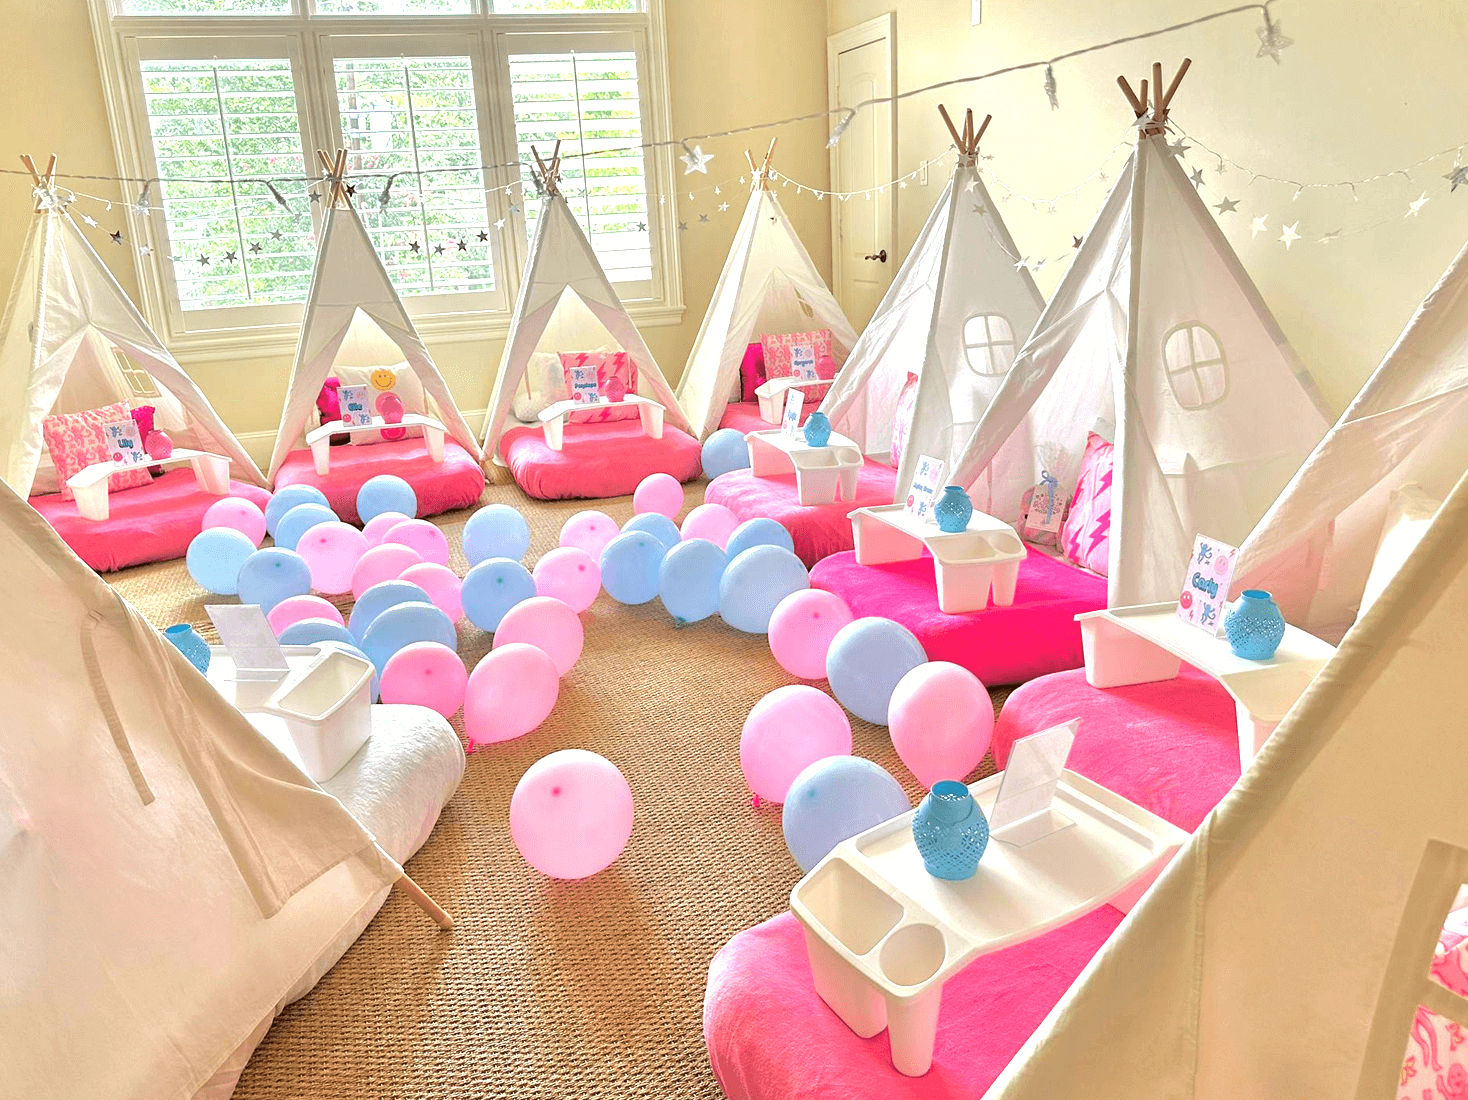 Slumber party and teepee party